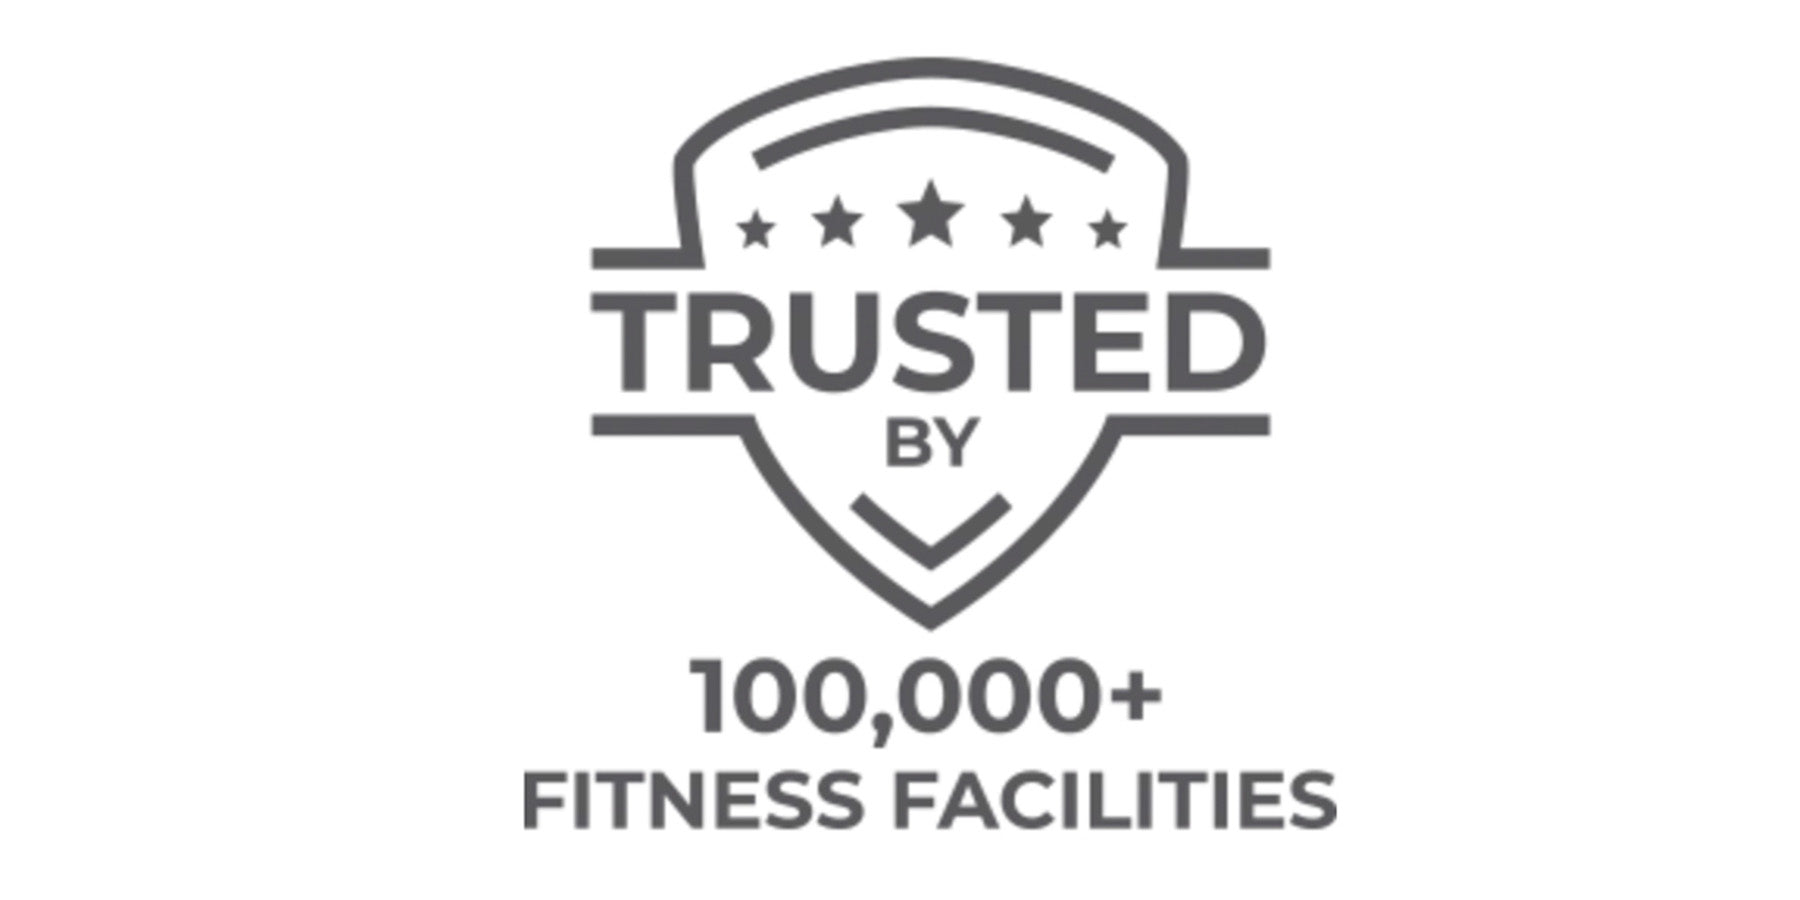 Life Fitness Trusted by 100,000+ facilities